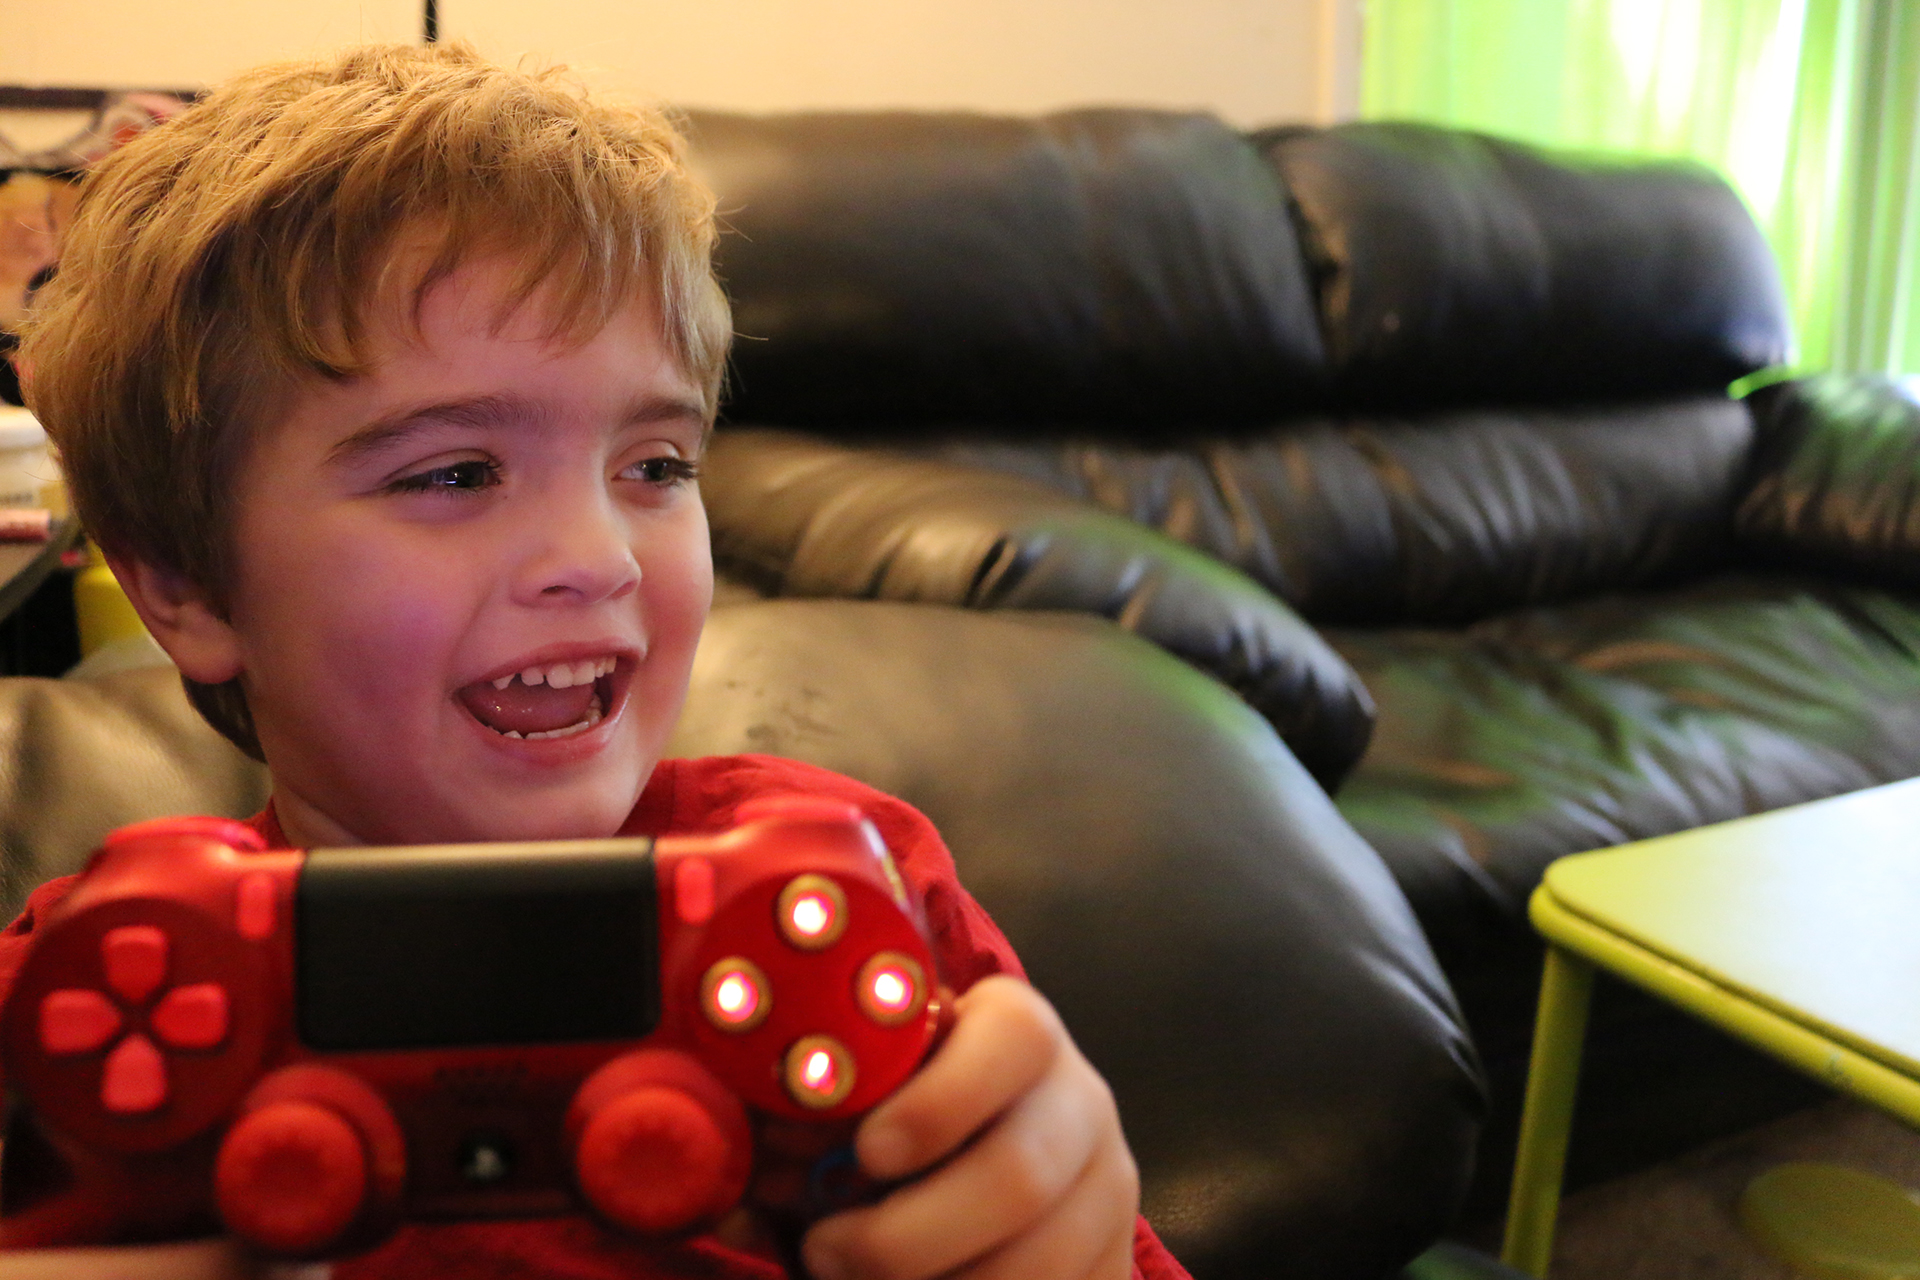 A Custom PlayStation 4 Controller Designed By A Five-Year-Old